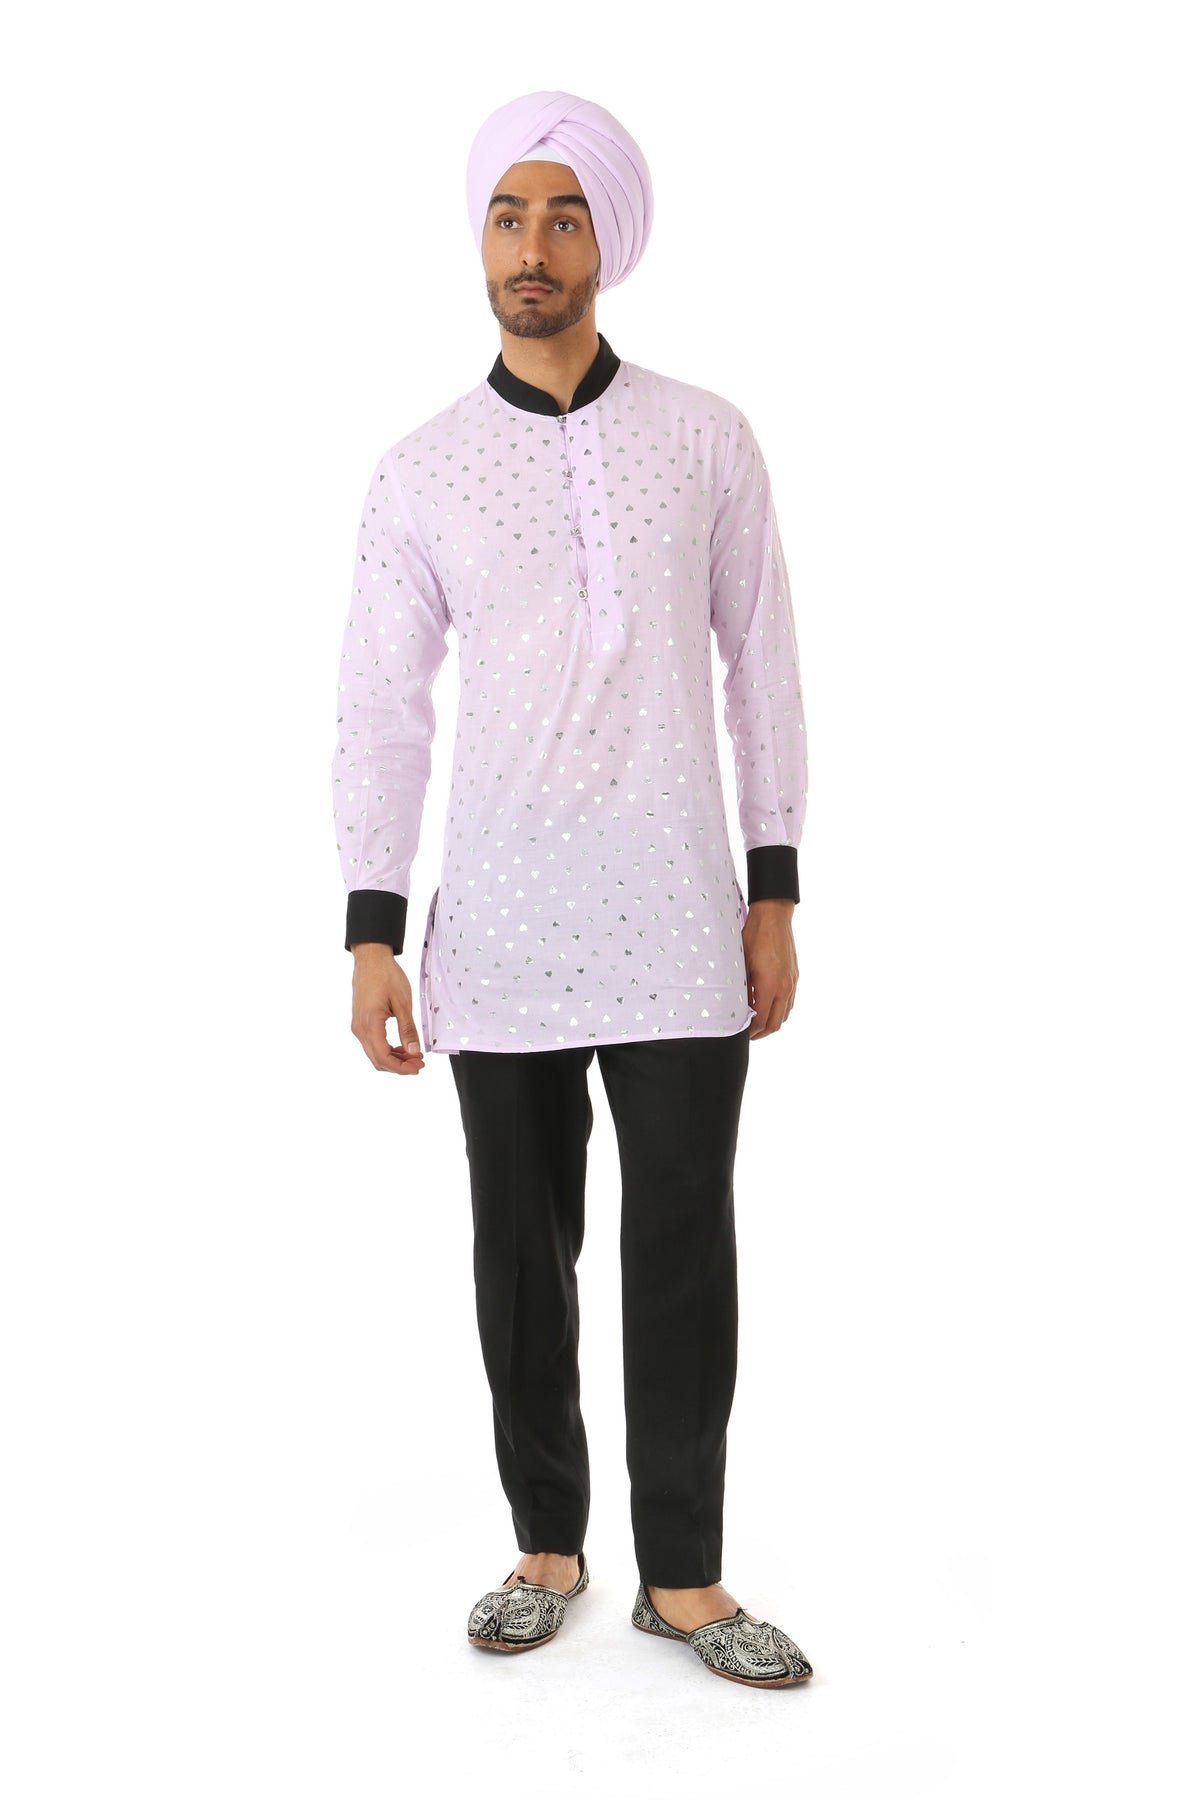 SUMEET Mens Long Sleeve Cotton Kurta in Lavender/silver hearts with contrasting cuffs and collar | HARLEEN KAUR